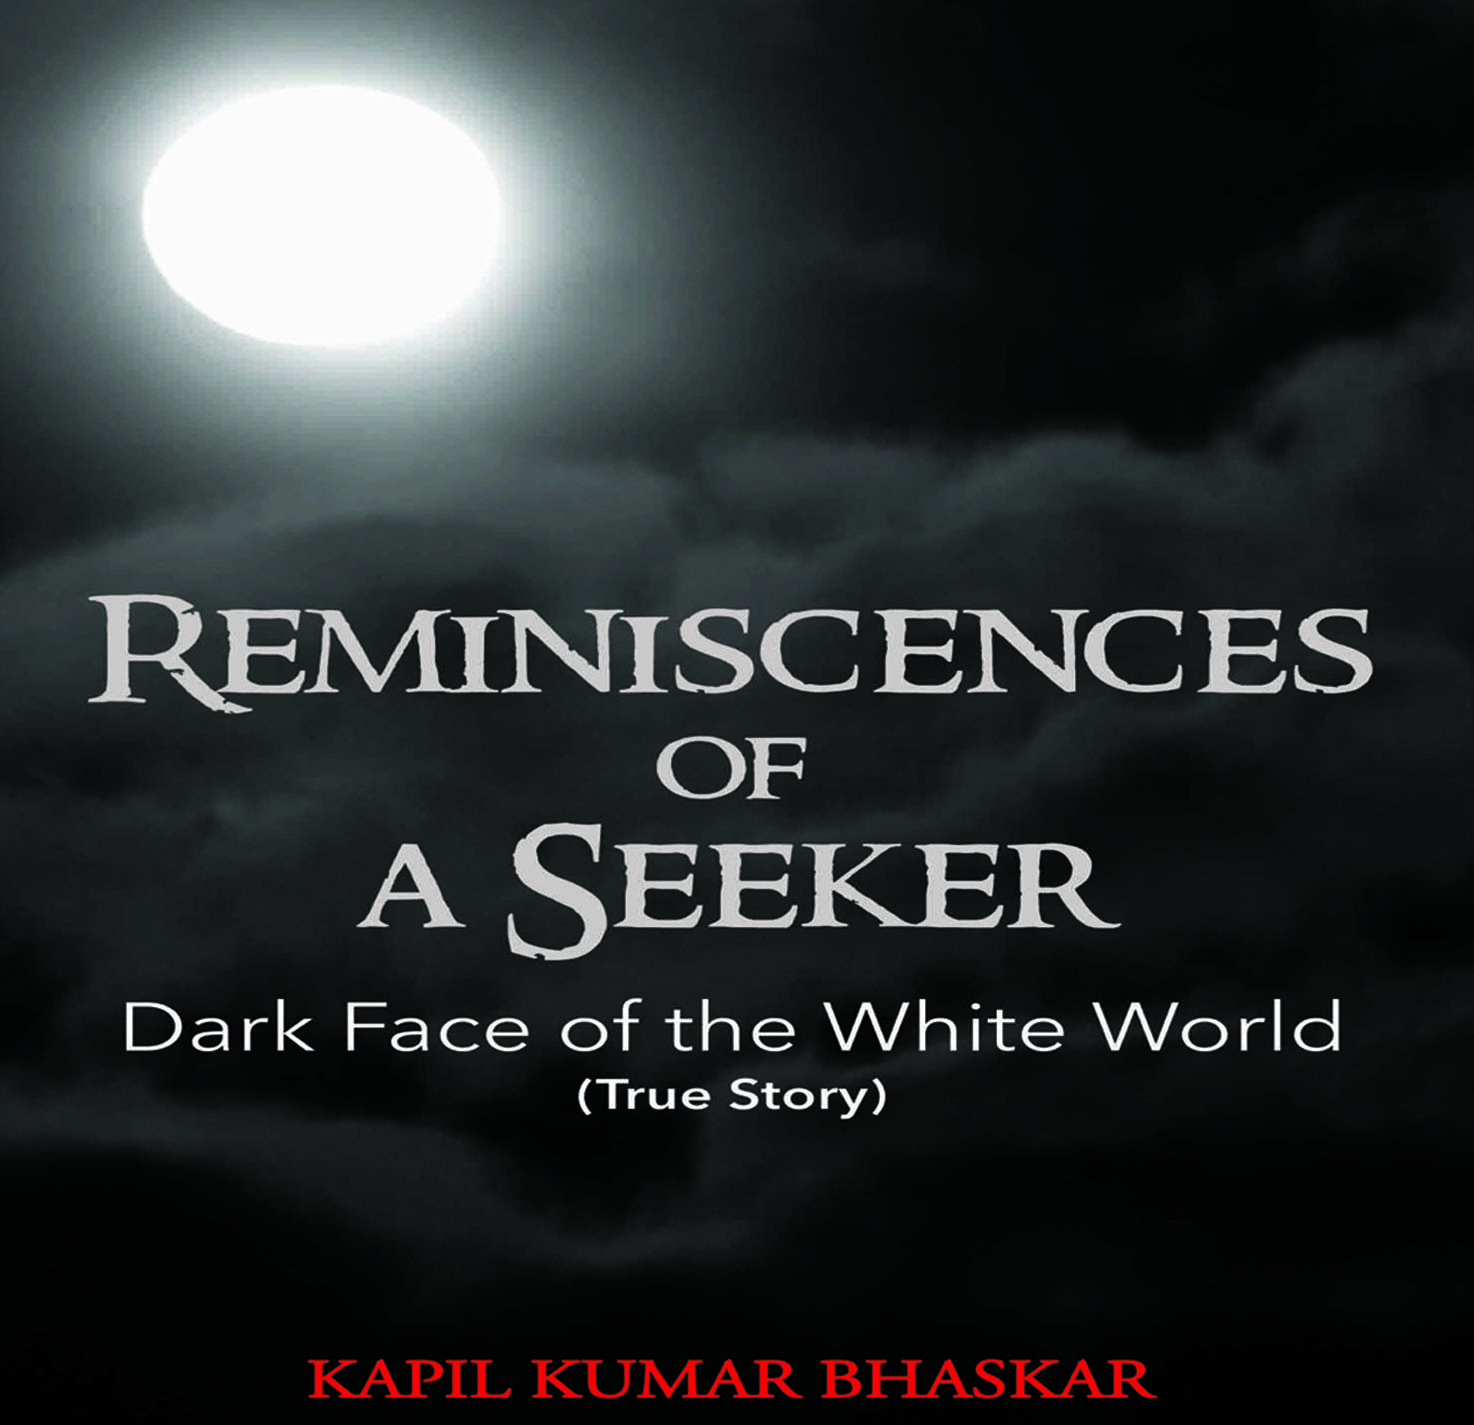 Reminiscences of a Seeker- Book Review